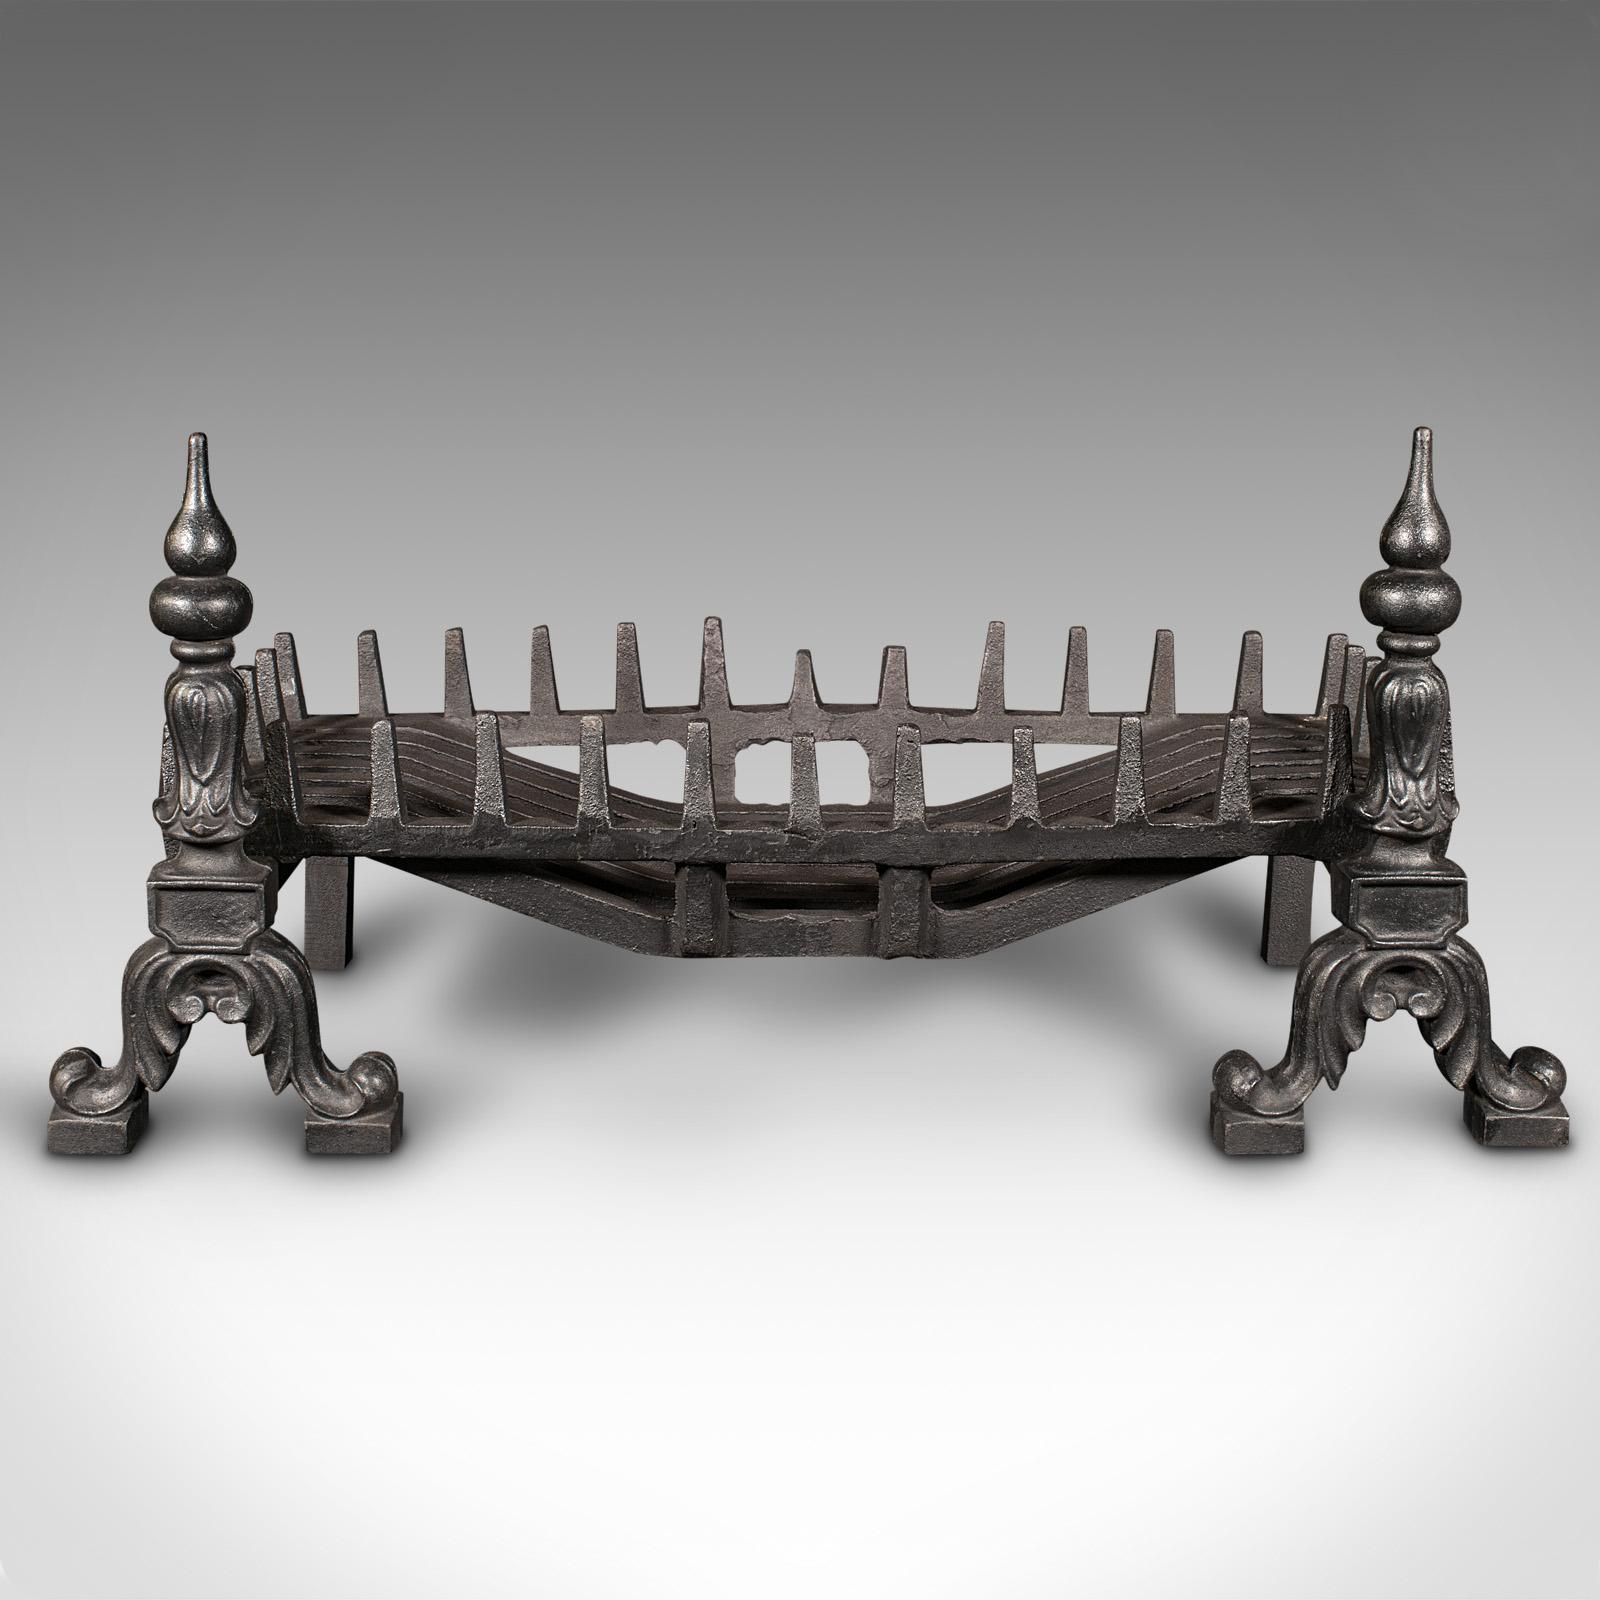 This is a vintage fireplace set. An English, cast iron fire basket with andirons, dating to the mid 20th century, circa 1940.

Of traditional taste, and shallow proportion
Displays a desirable aged patina and in good order
Wide fire basket with